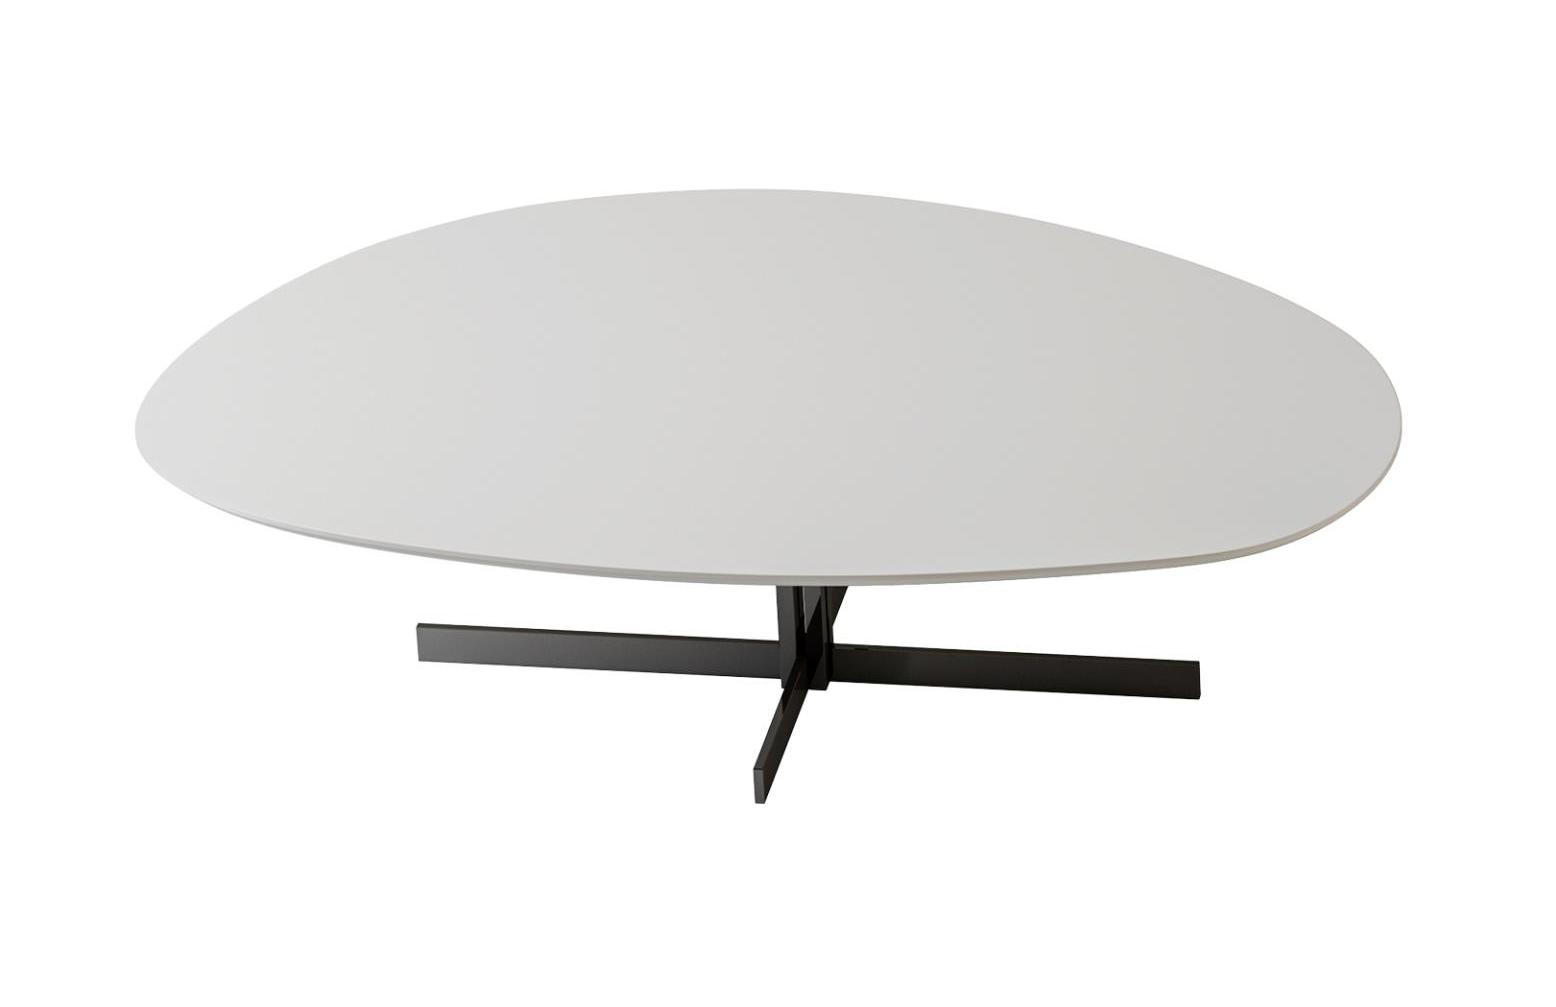 Atom Chic Small Table